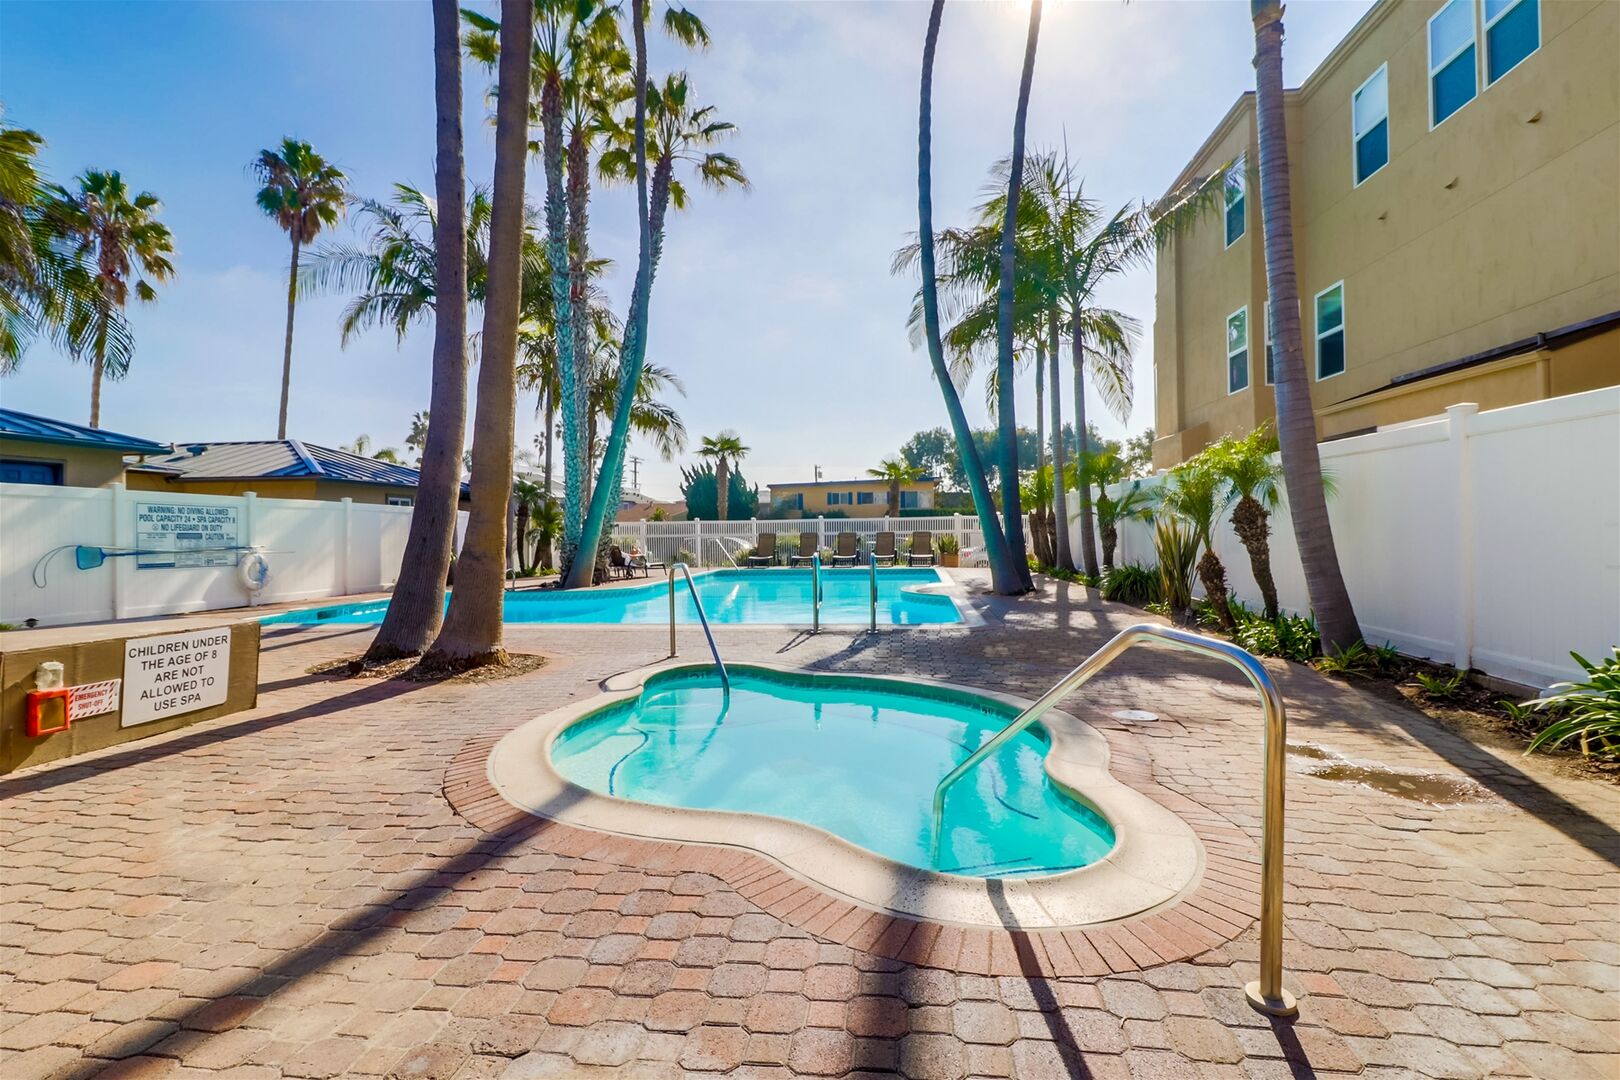 Capri by the Sea pool and hot tub area located on the ground floor behind the complex about half of a block away.